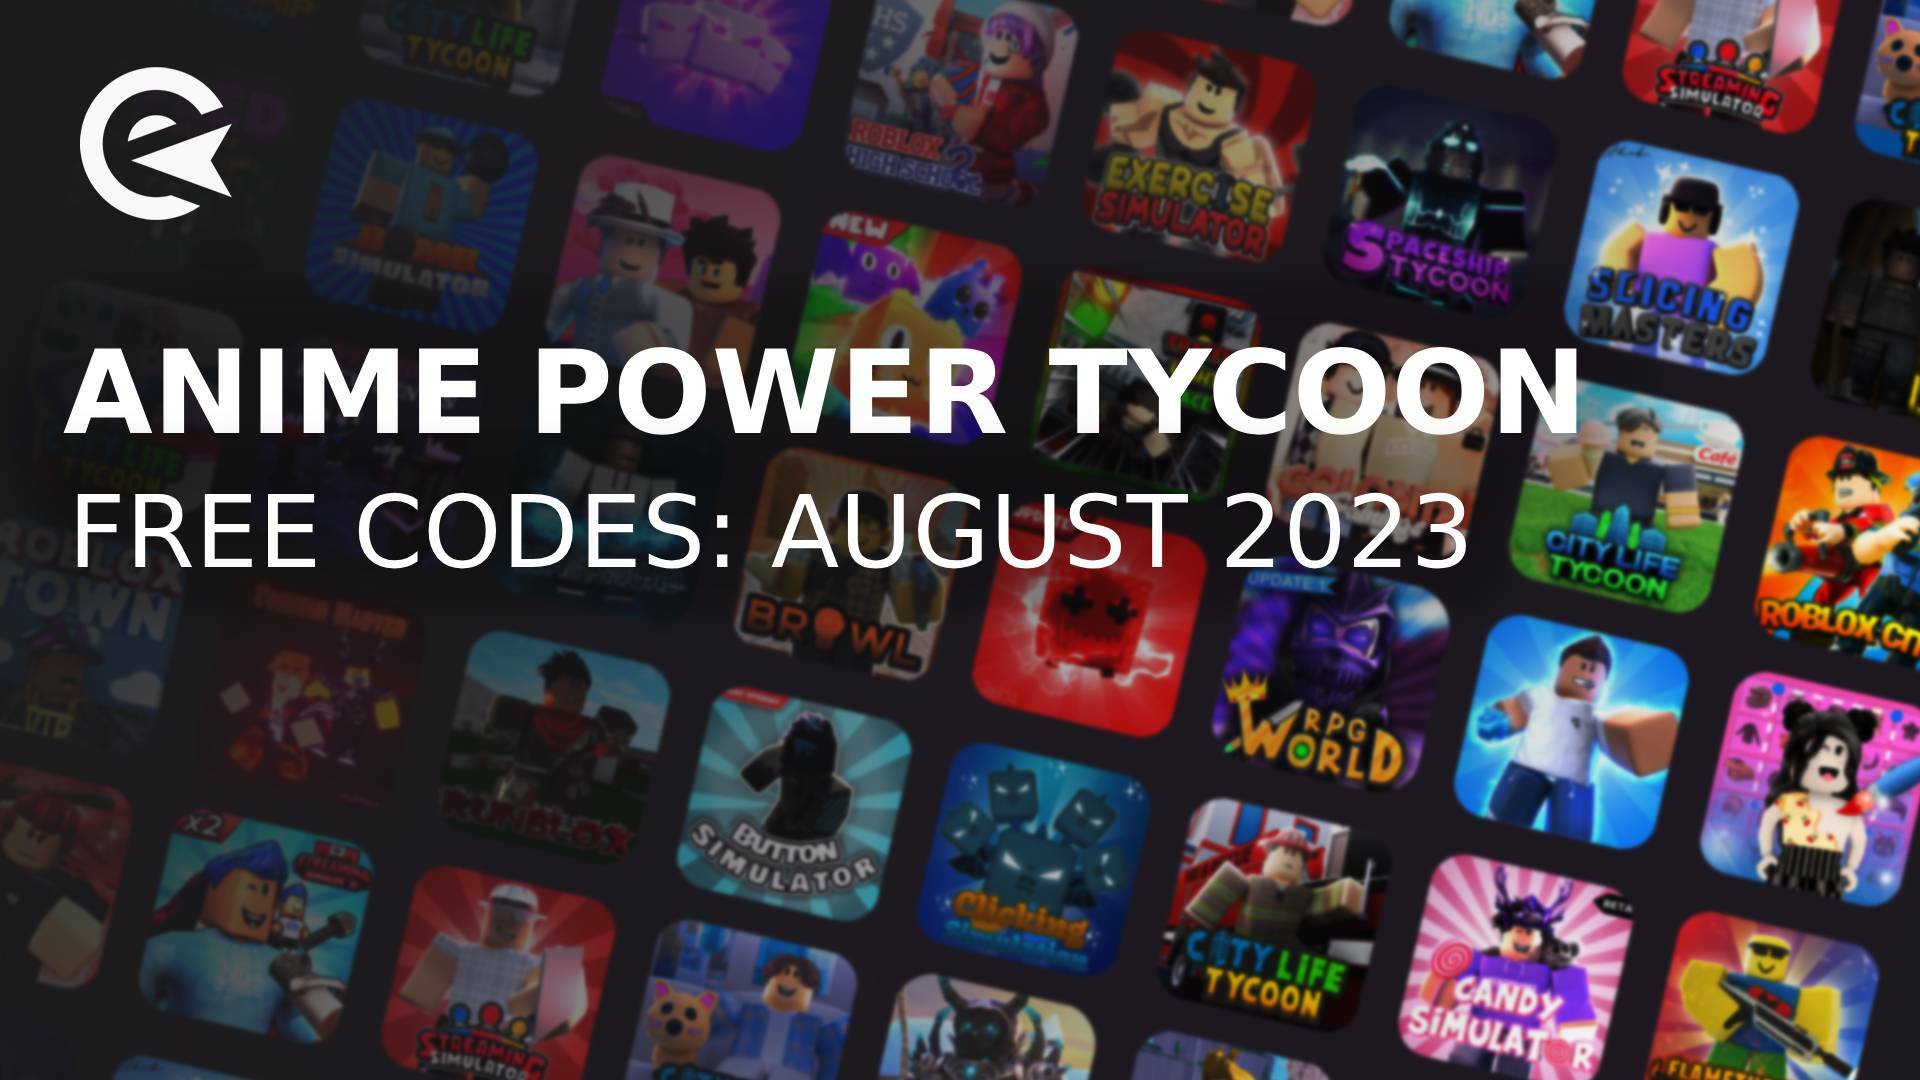 Codes of Anime Power Tycoon (August 2023) - GuíasTeam